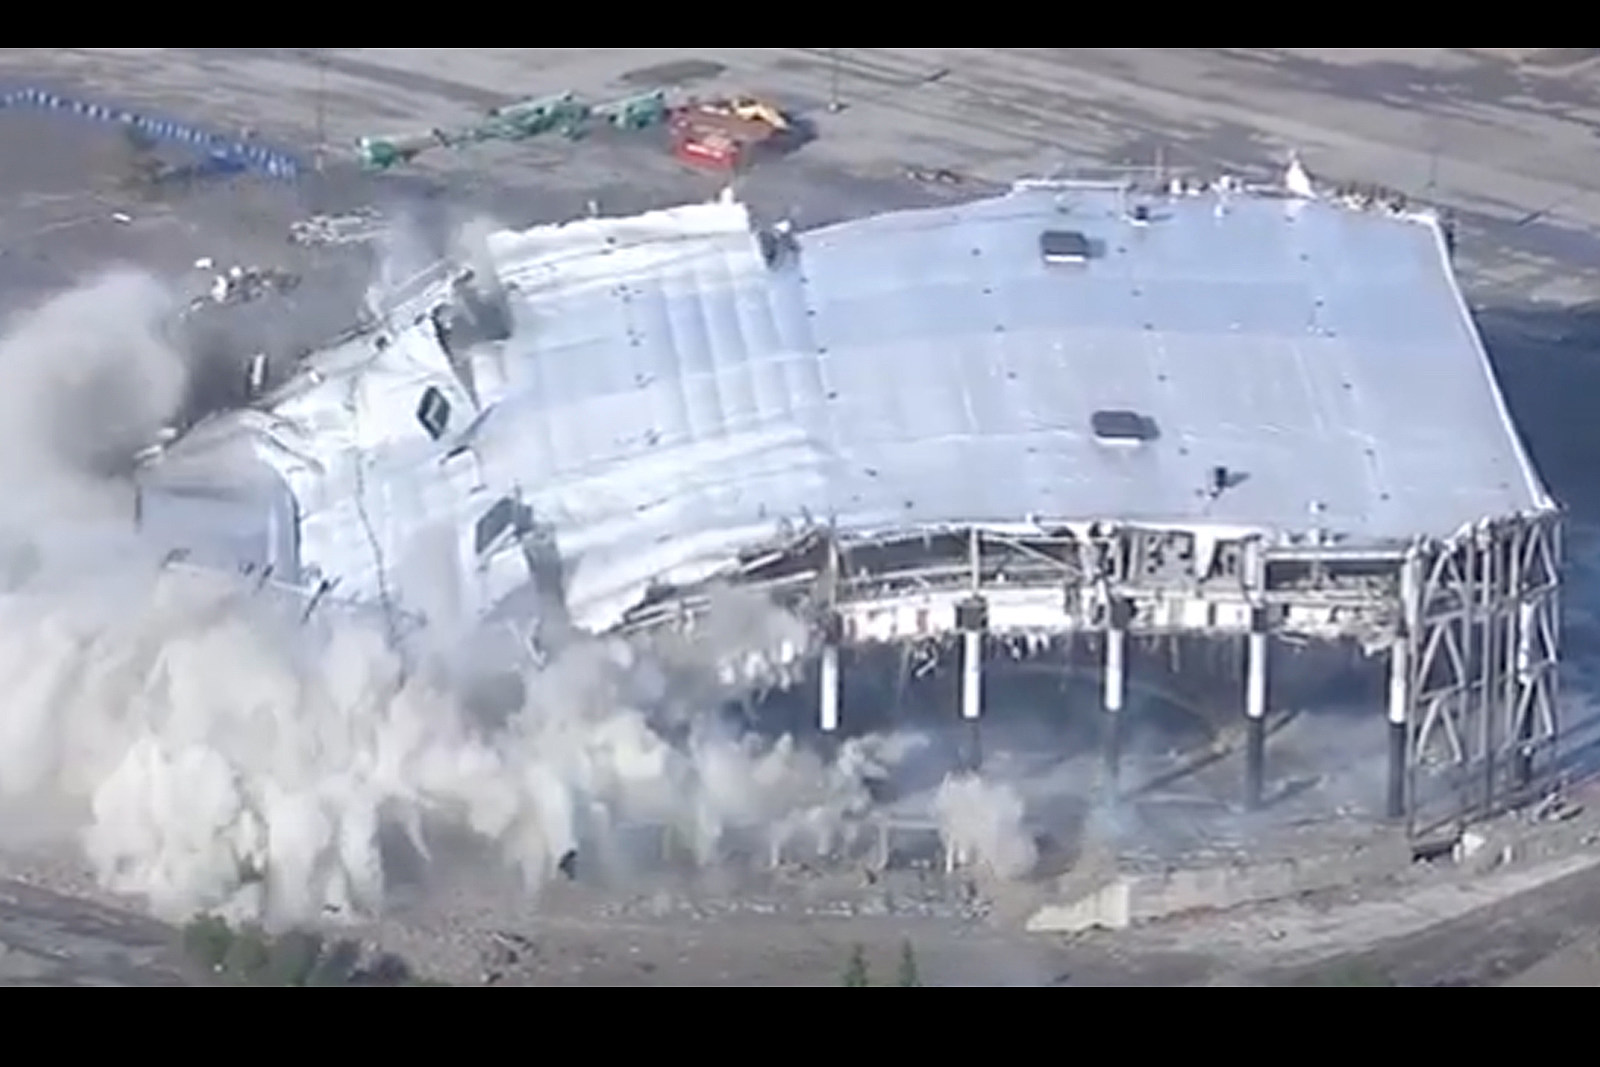 Detroit Pistons' Palace of Auburn Hills imploded to cheers and shock